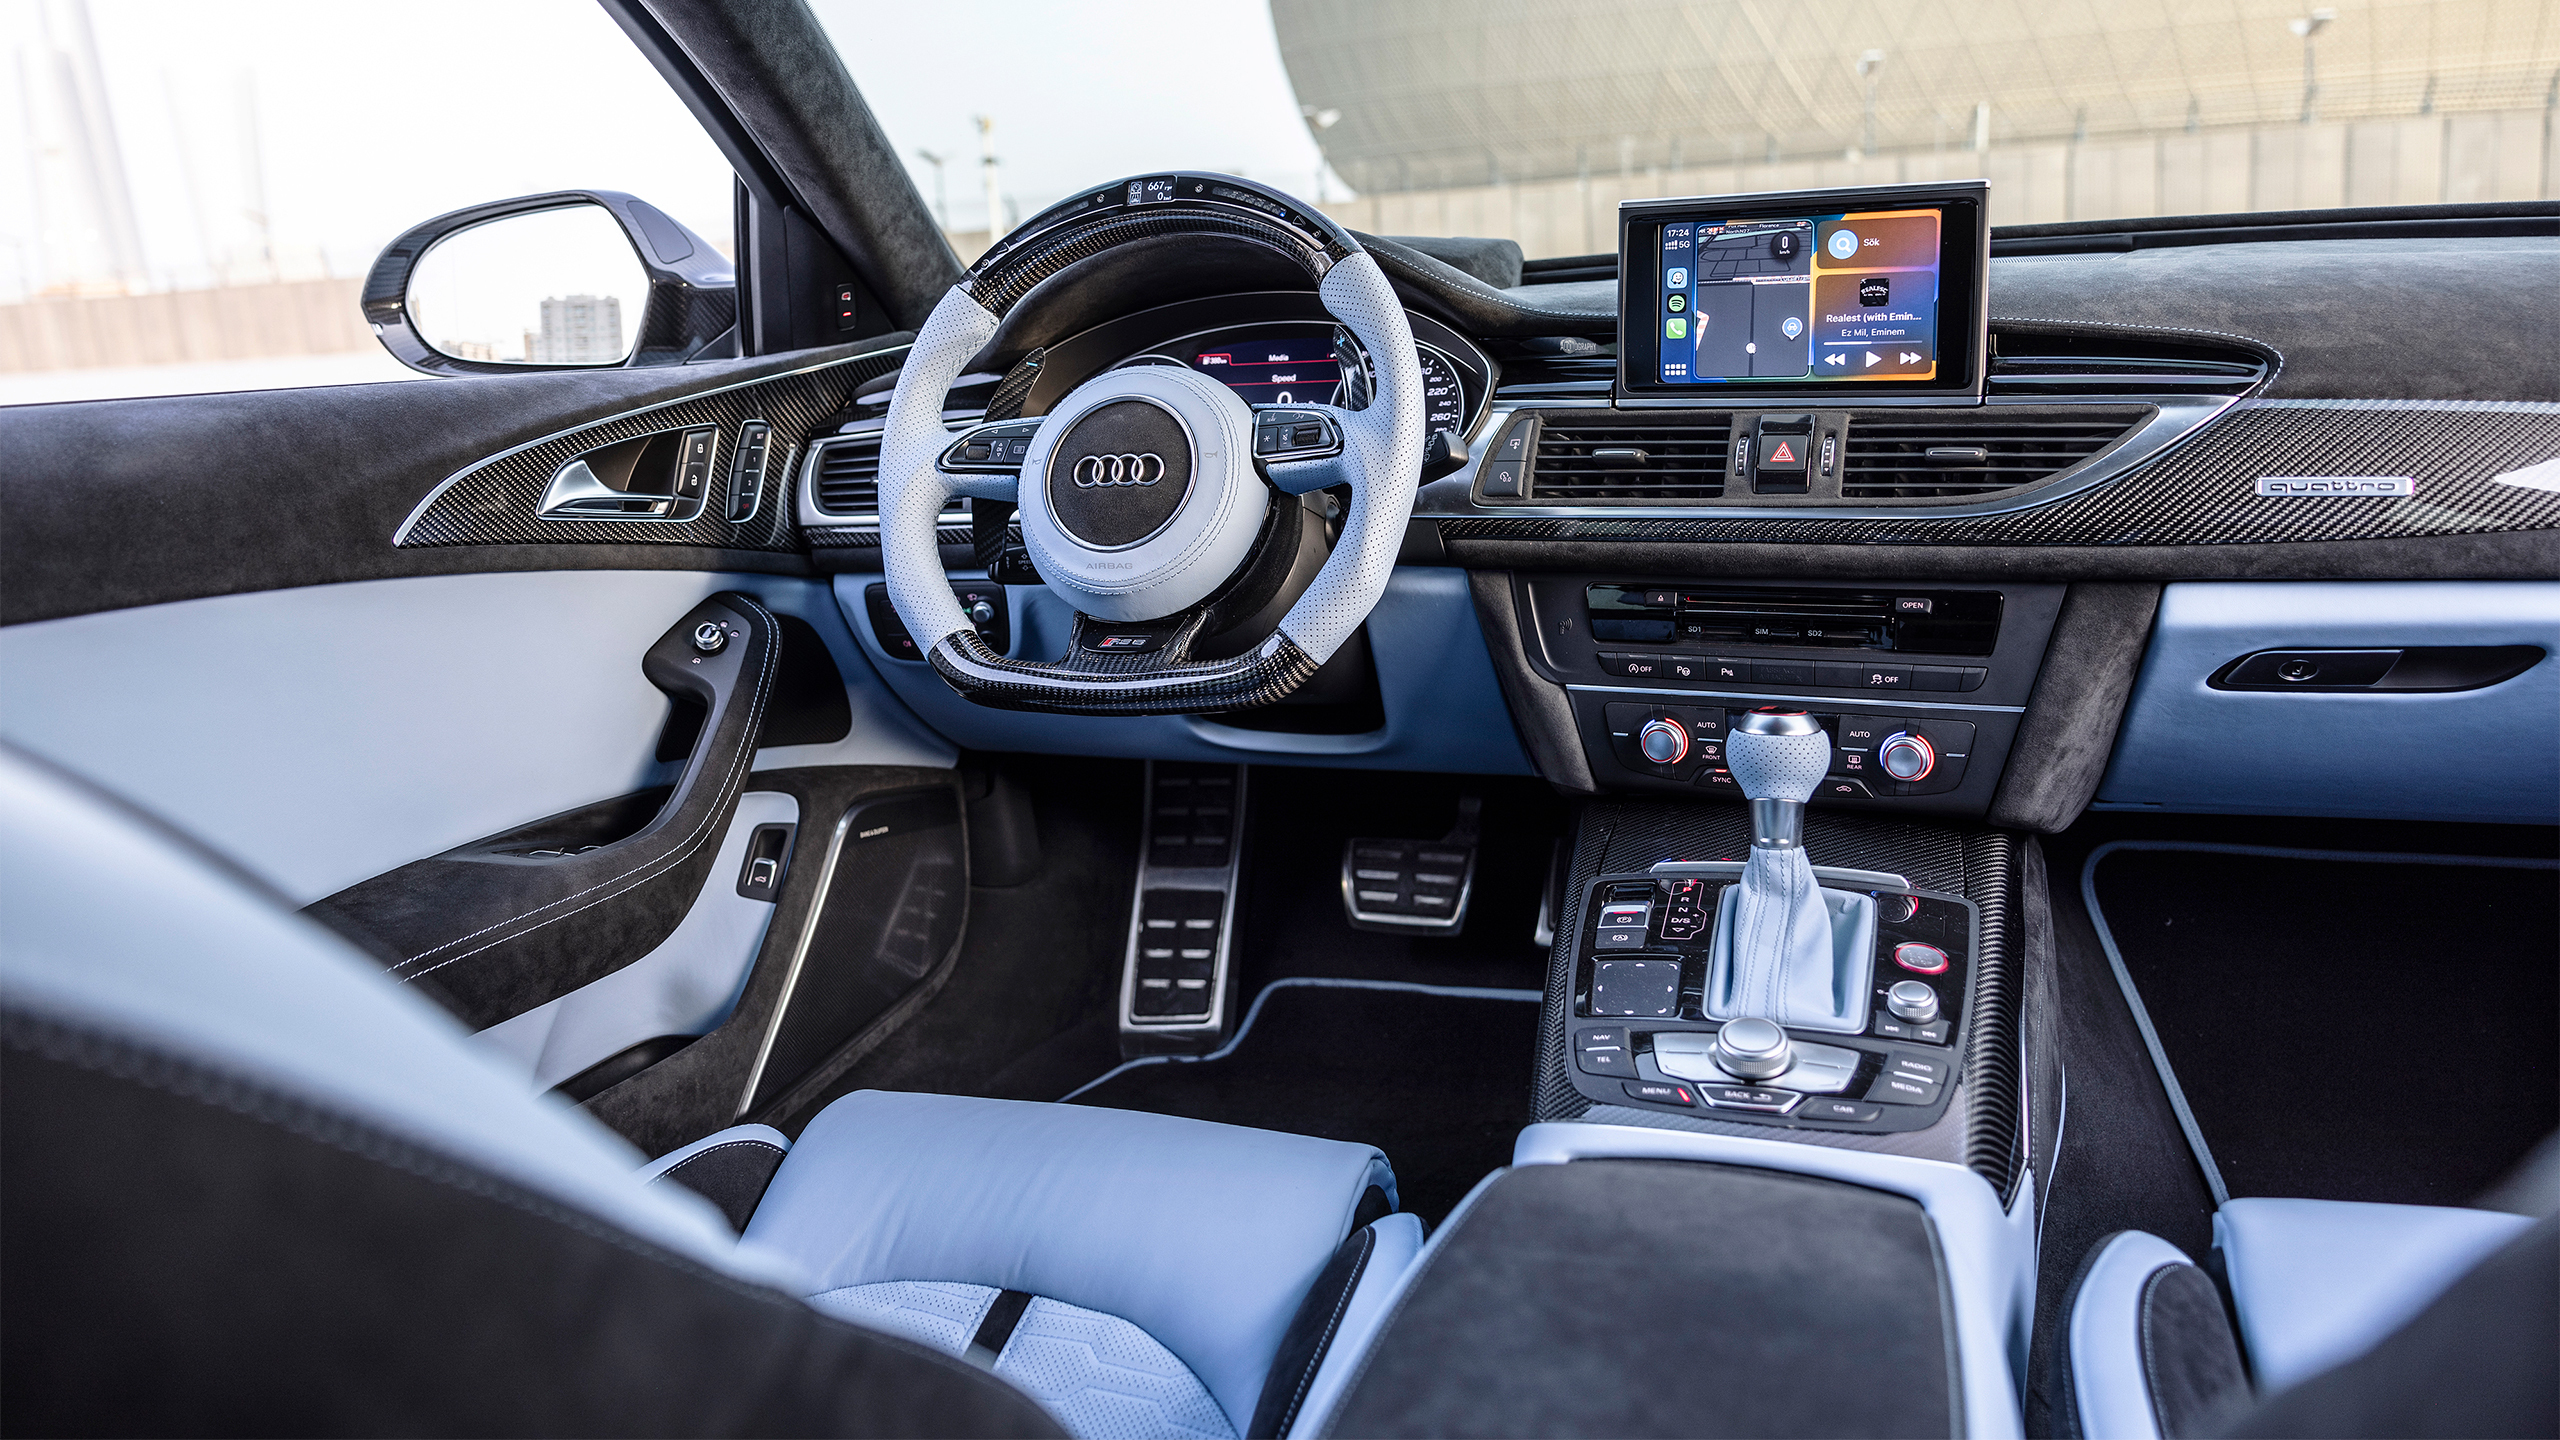 What's Not To Love About A 750 HP Audi RS6 With A Light Blue Interior?